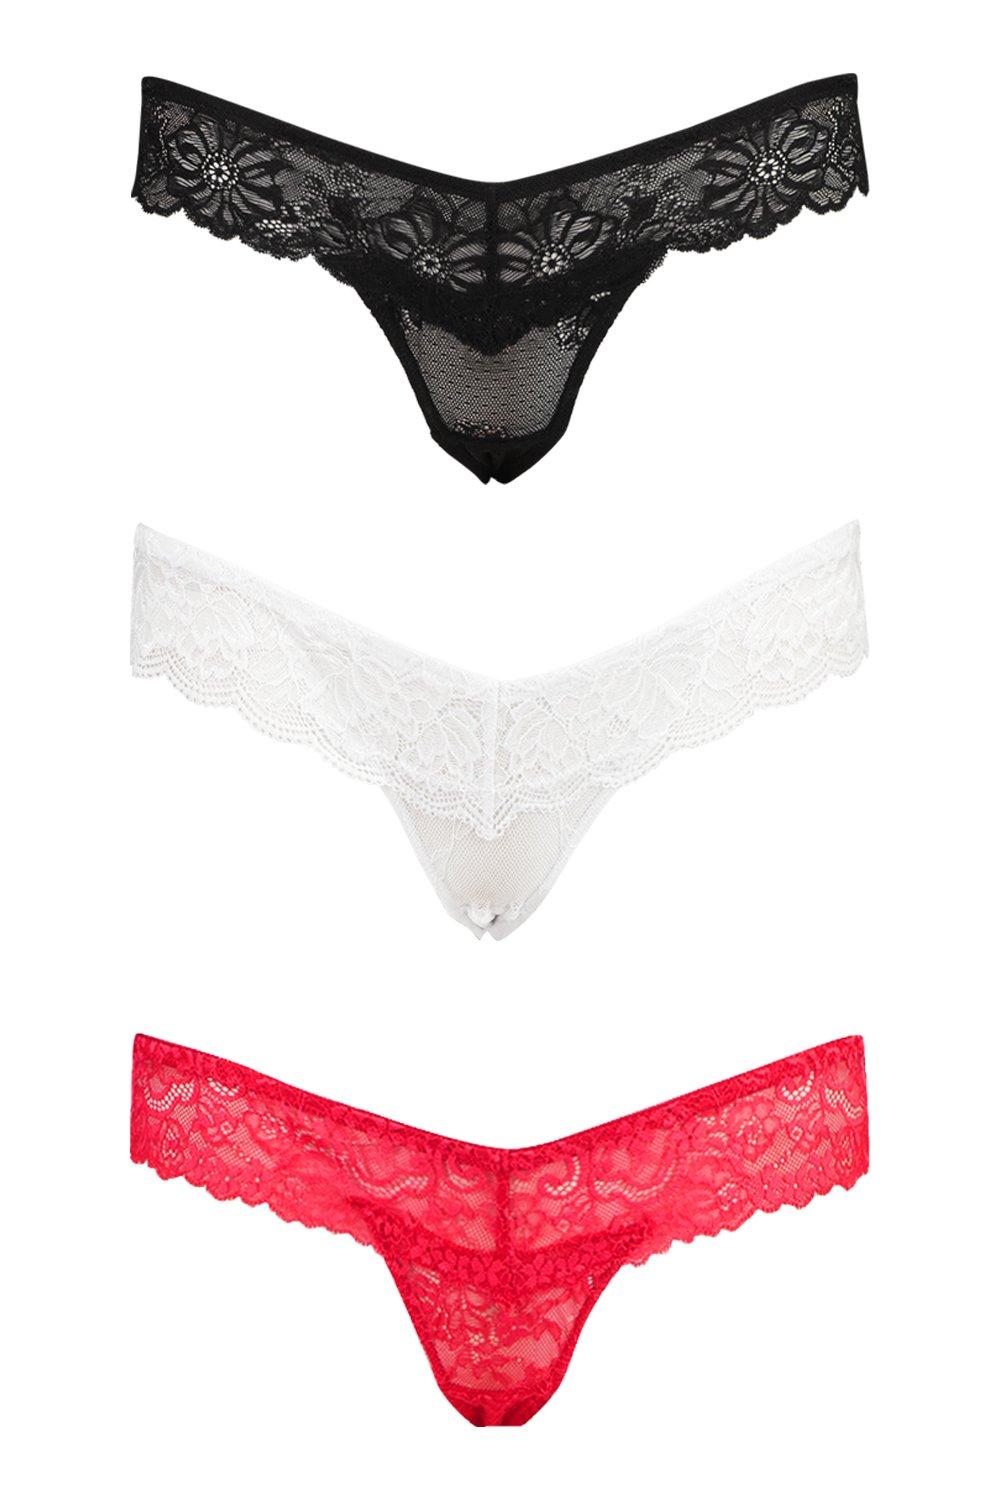 Accessorize Lace Thongs Set of Three